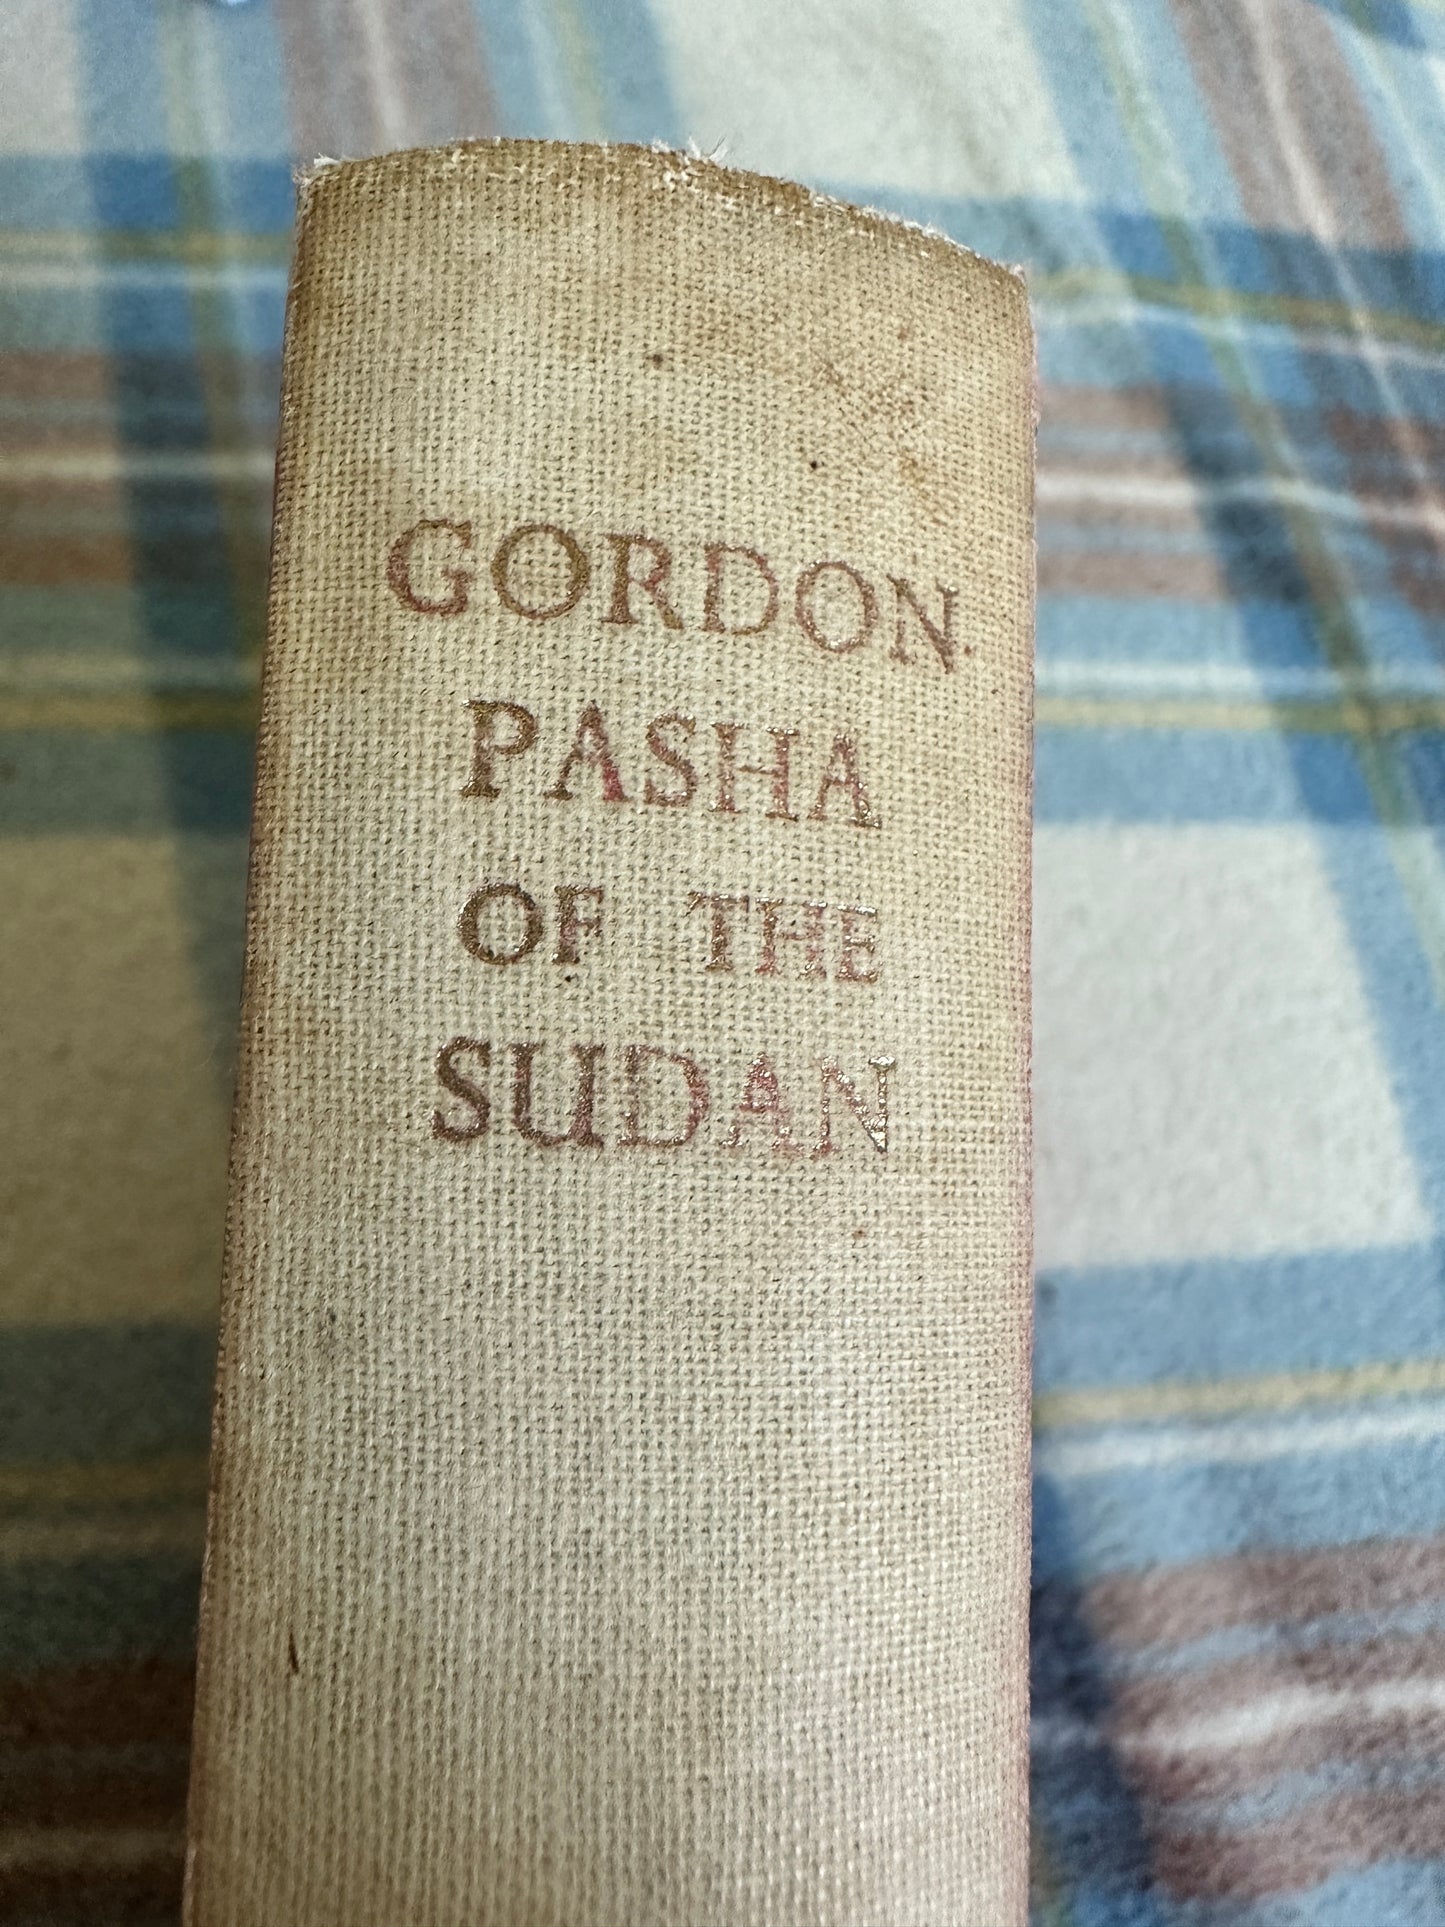 1958*1st* Gordon Pasha Of The Sudan(The Life Story Of An Ill-Requitted Soldier) - Lieut. Colonel Hon. Gerald French DSO(William Maclellan Pub)